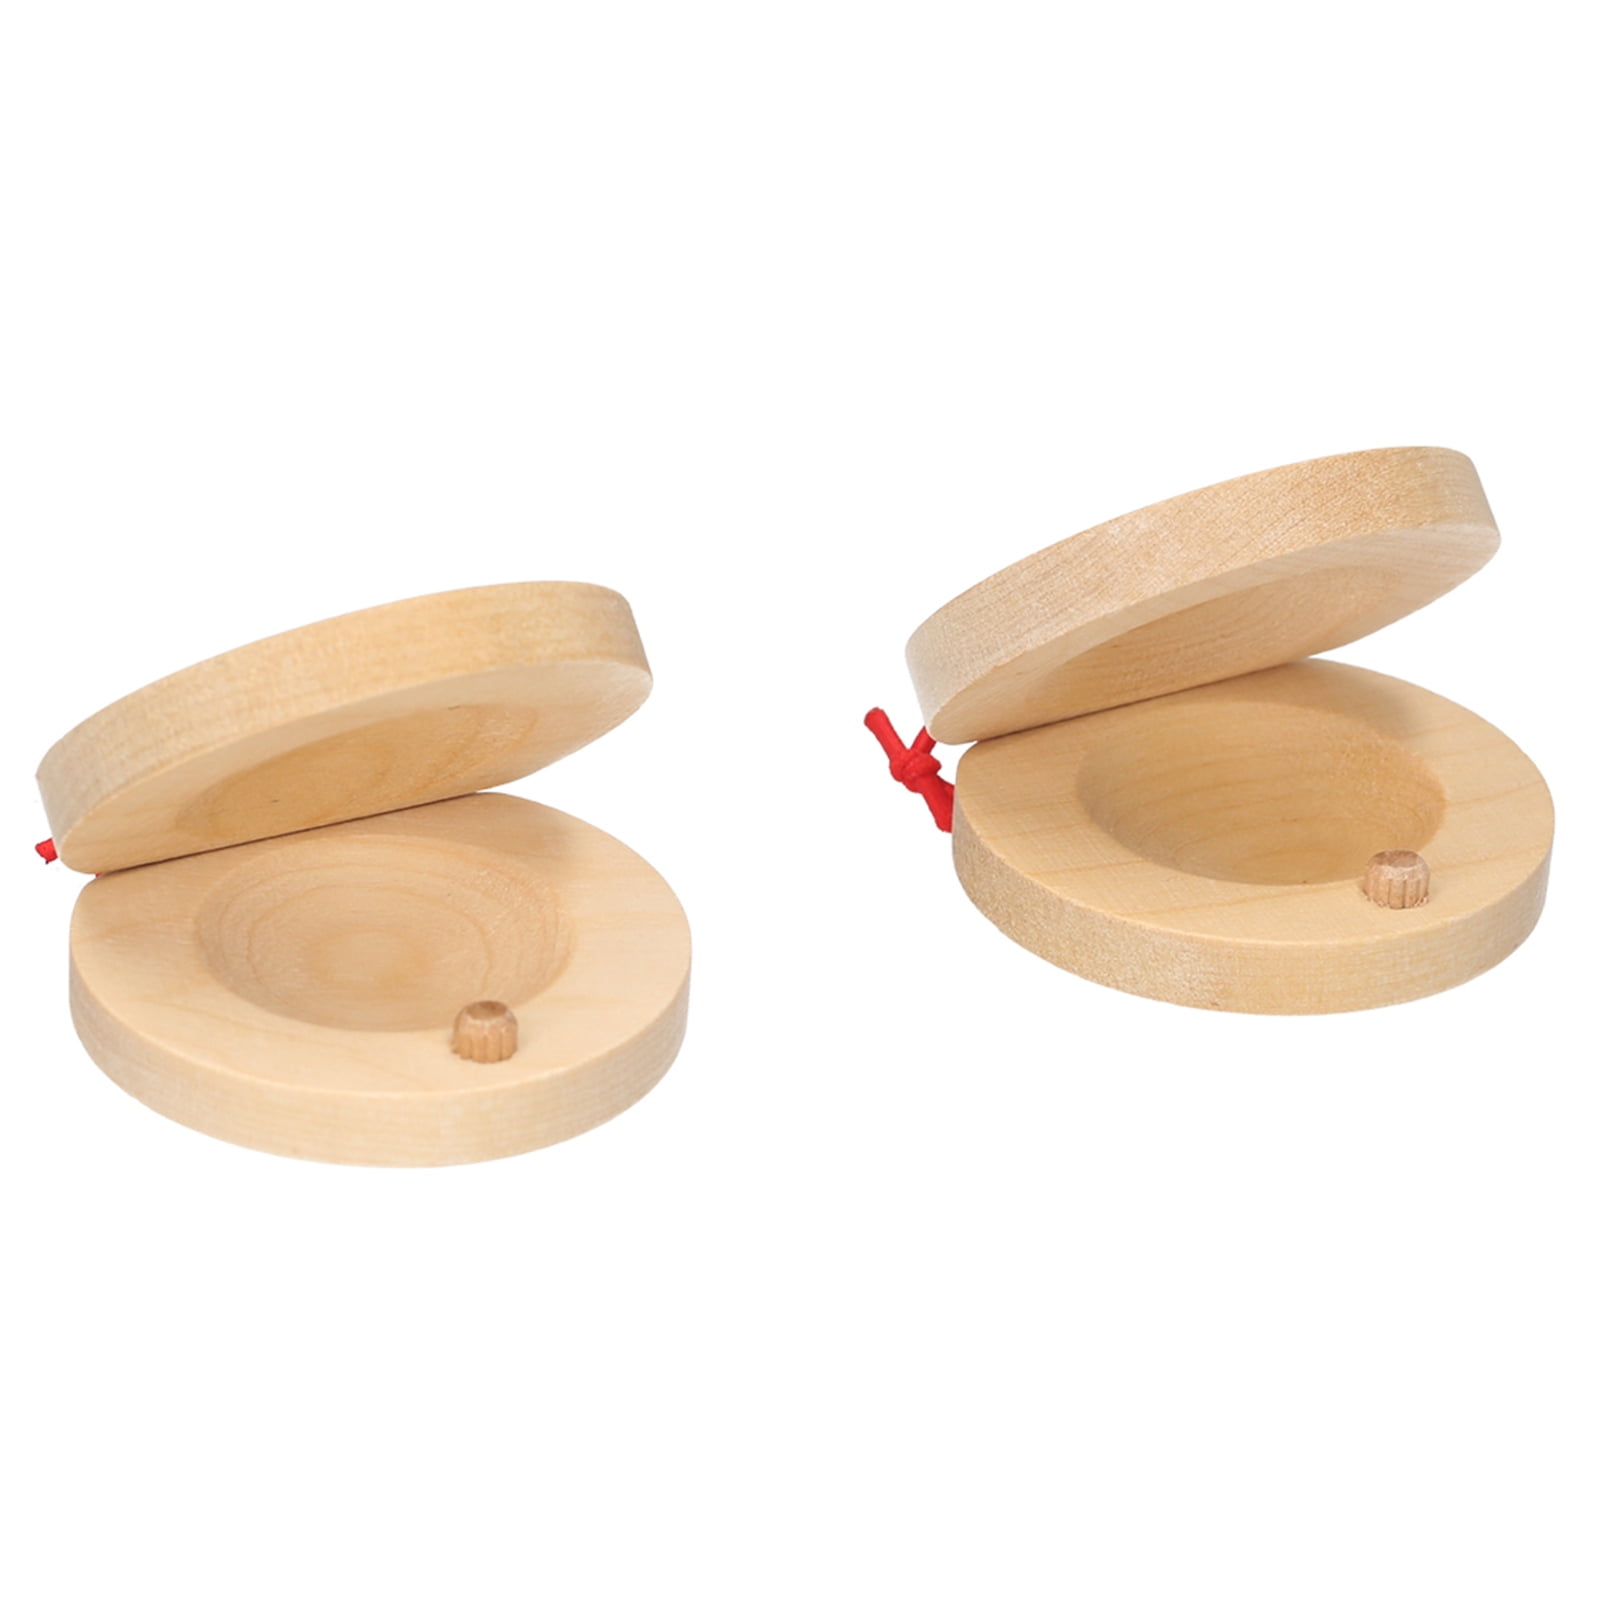 Ktoyols Pair of Castanets Wooden Castanet Finger Clappers Musical Instrument